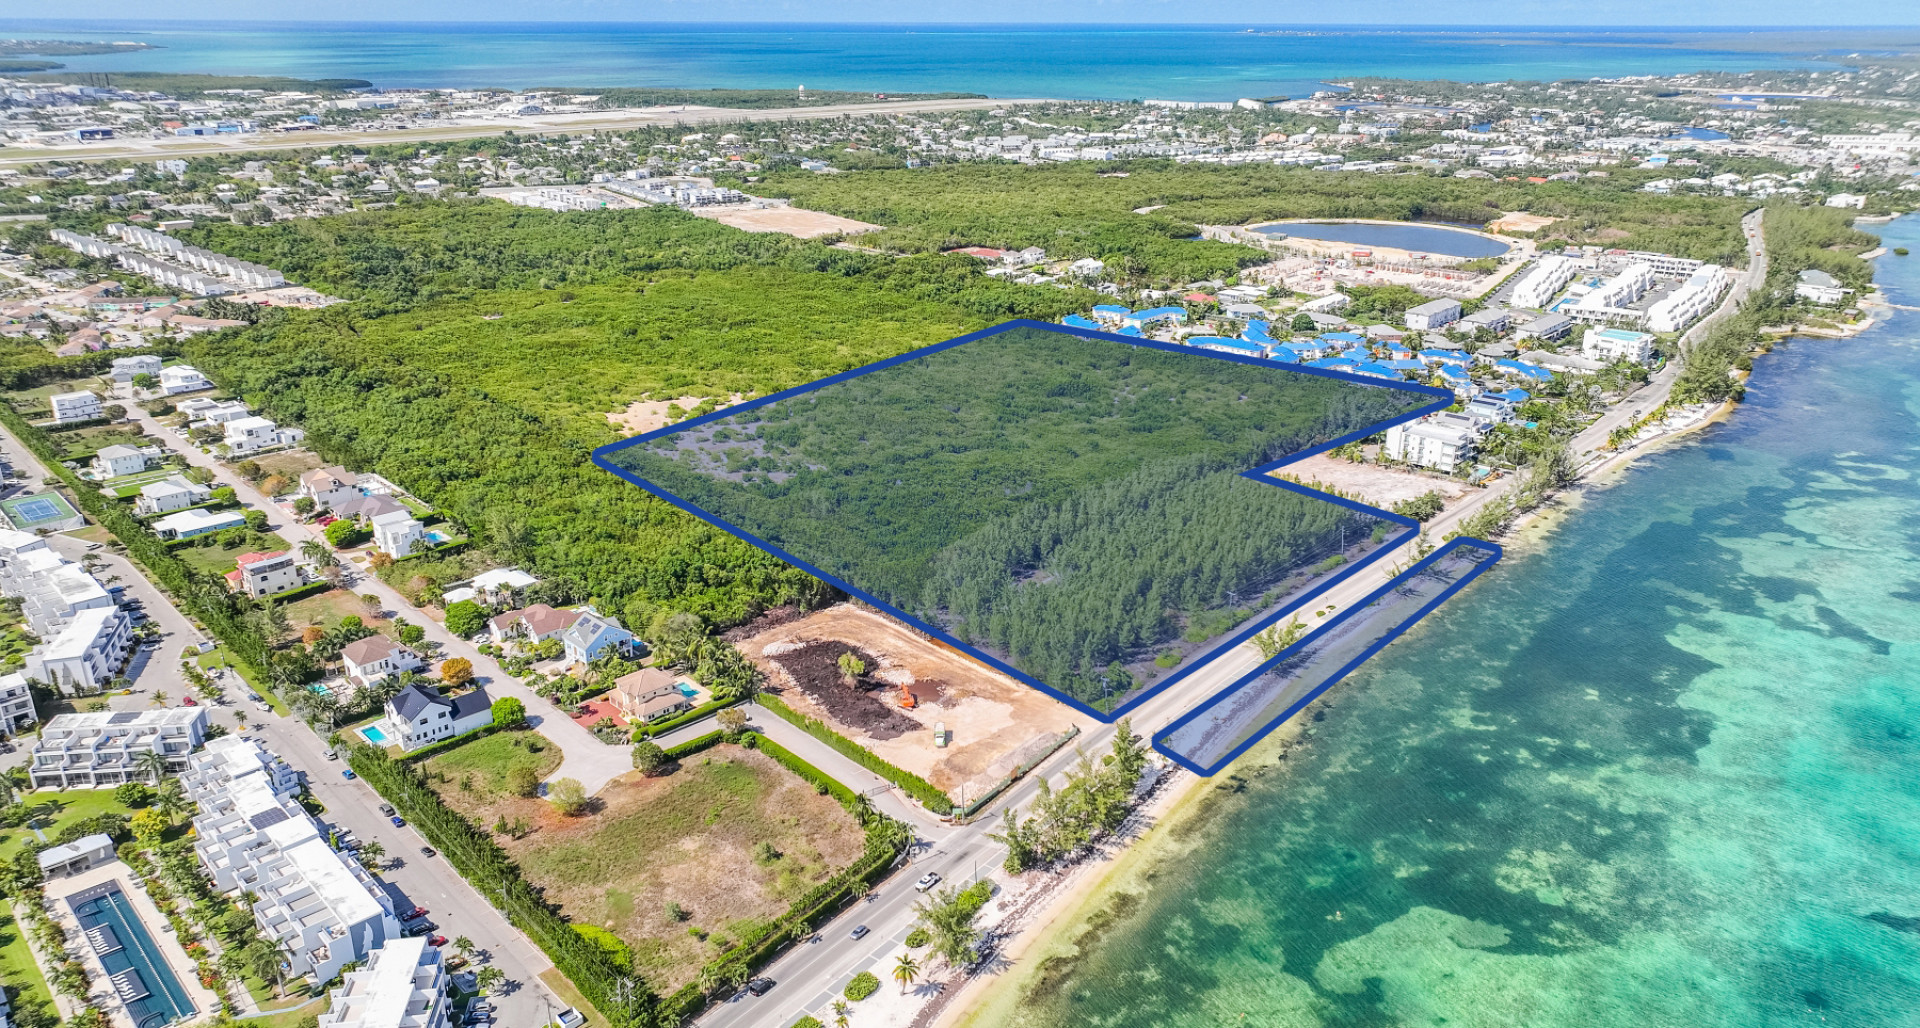 Heavy Industrial Development Land off Seymour Drive-Massive Reduction!!- Motivated Seller